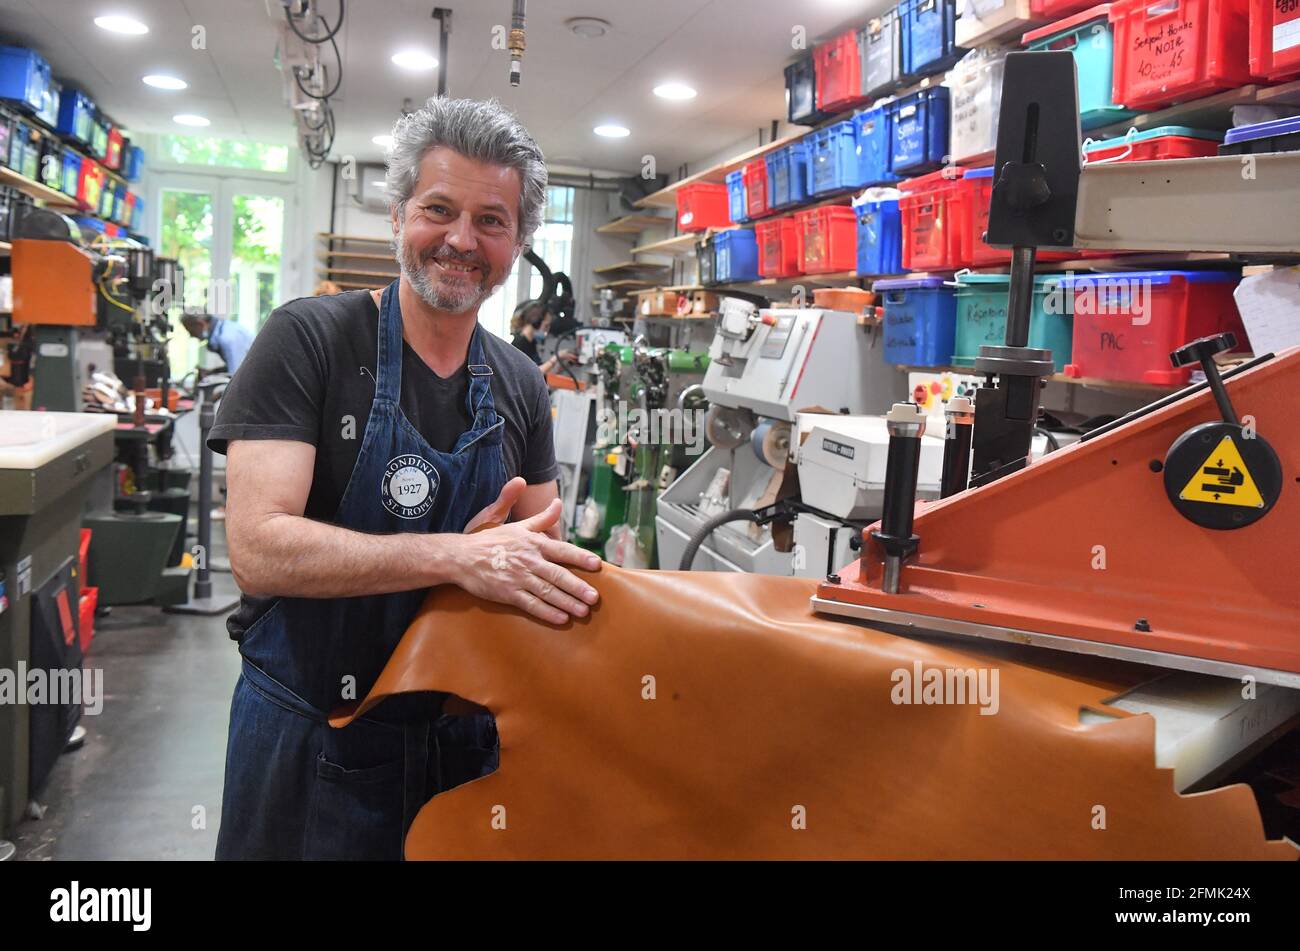 manufacture of Tropezian sandals by Alain Rondini, craftsman since 1927, in  Saint-Tropez, France on May 8, 2021. Photo by Christian  Liewig/ABACAPRESS.COM Stock Photo - Alamy